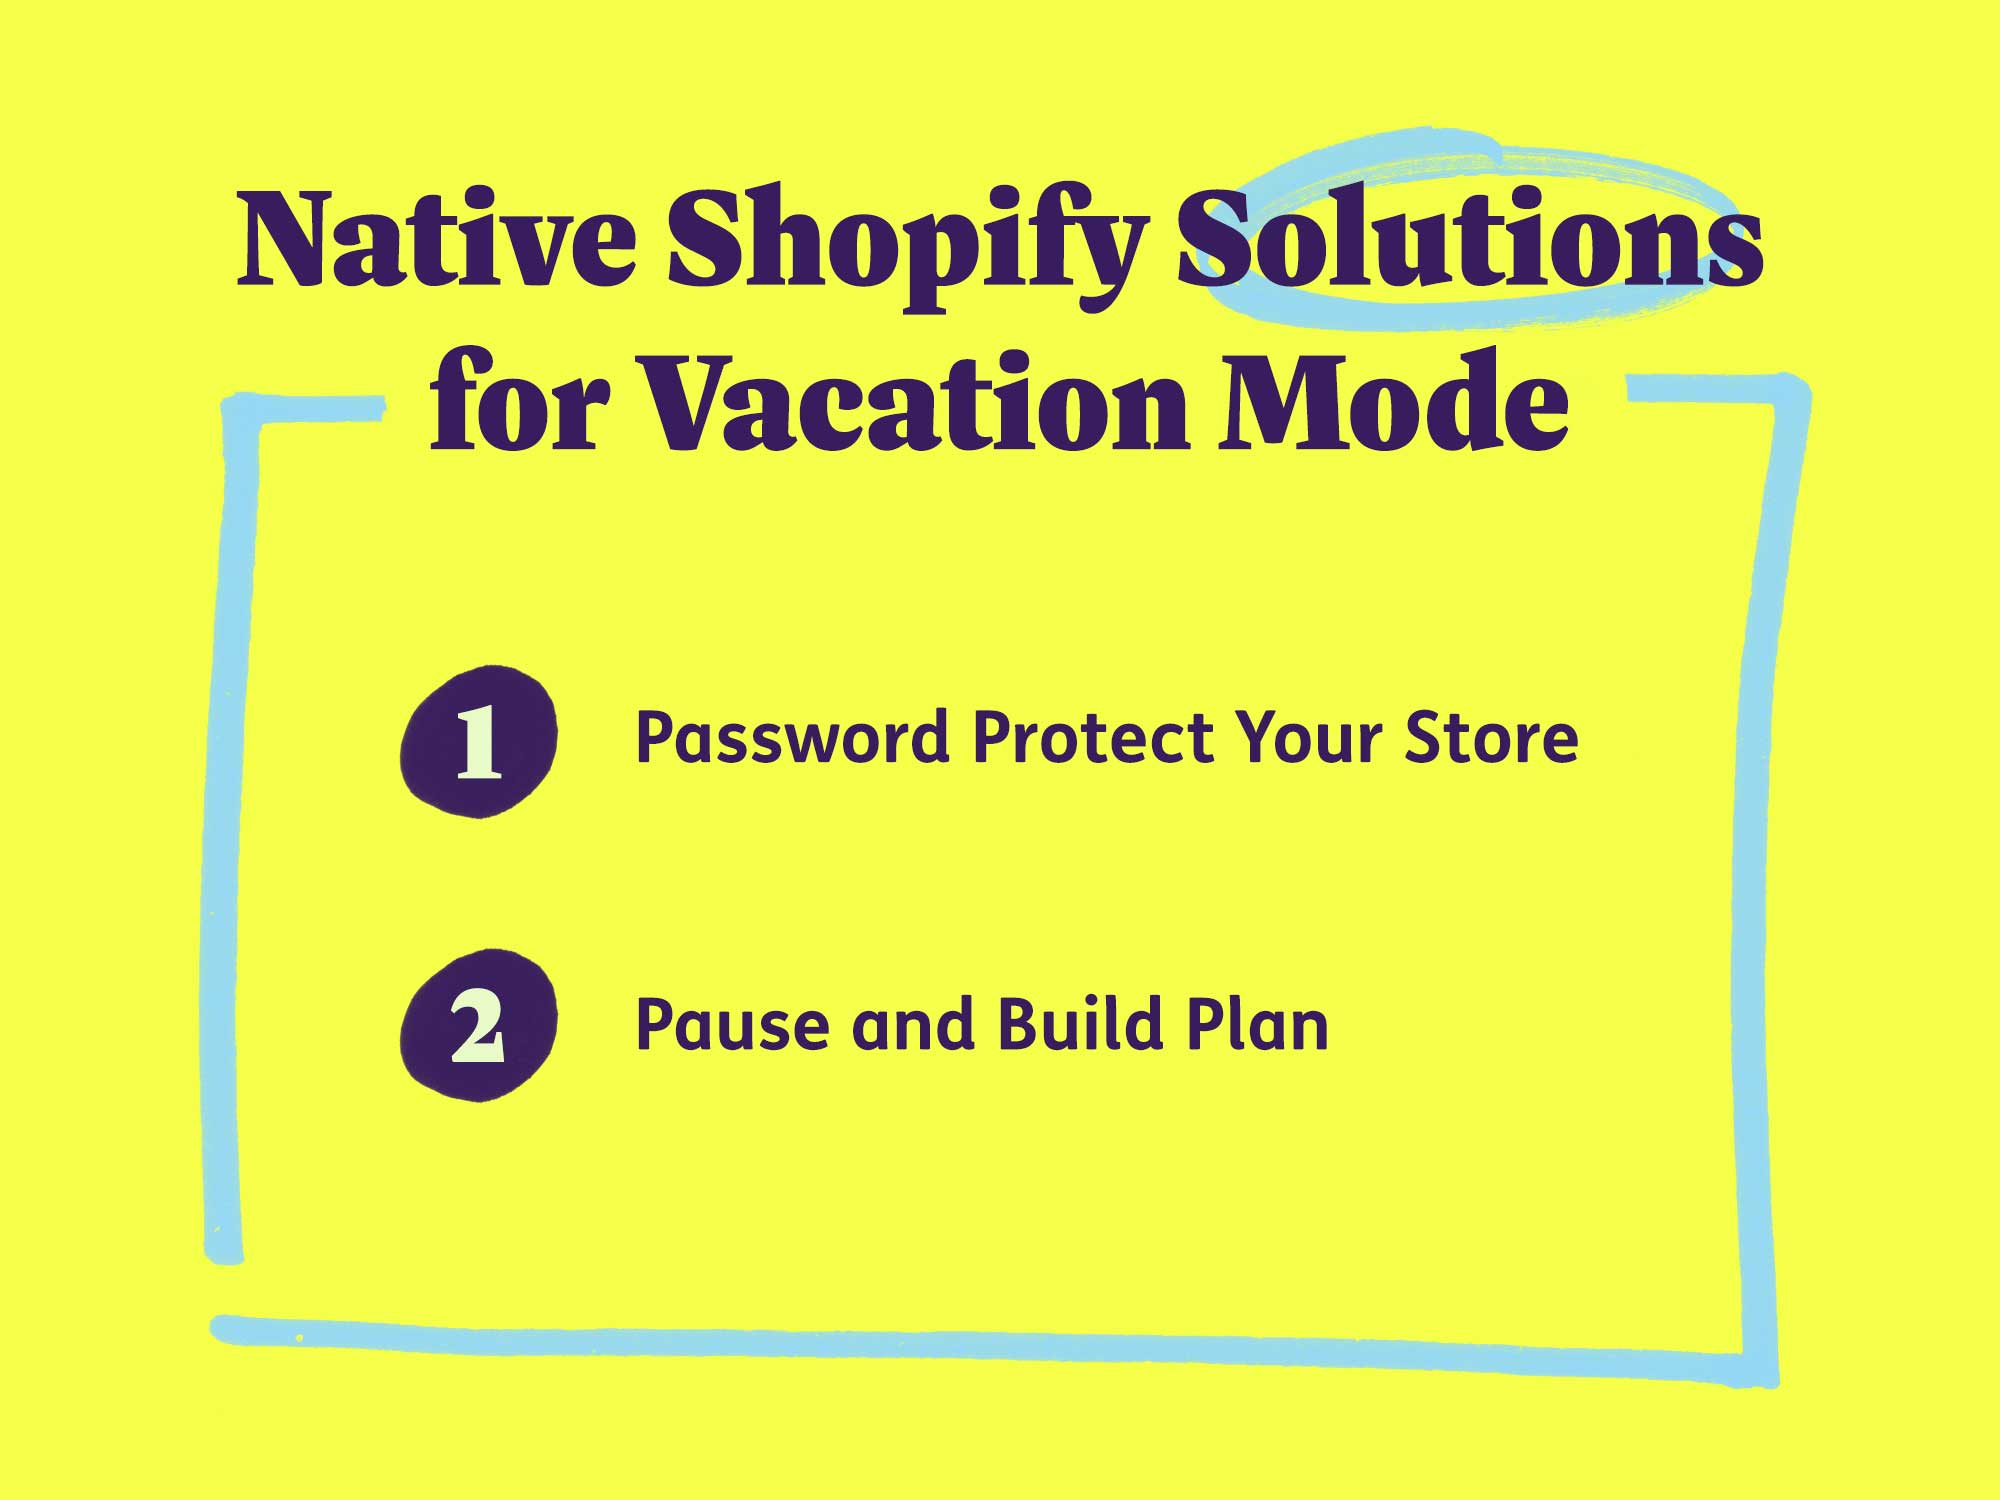 Native Shopify solutions for vacation mode: Password protect your store or pause and build plan.